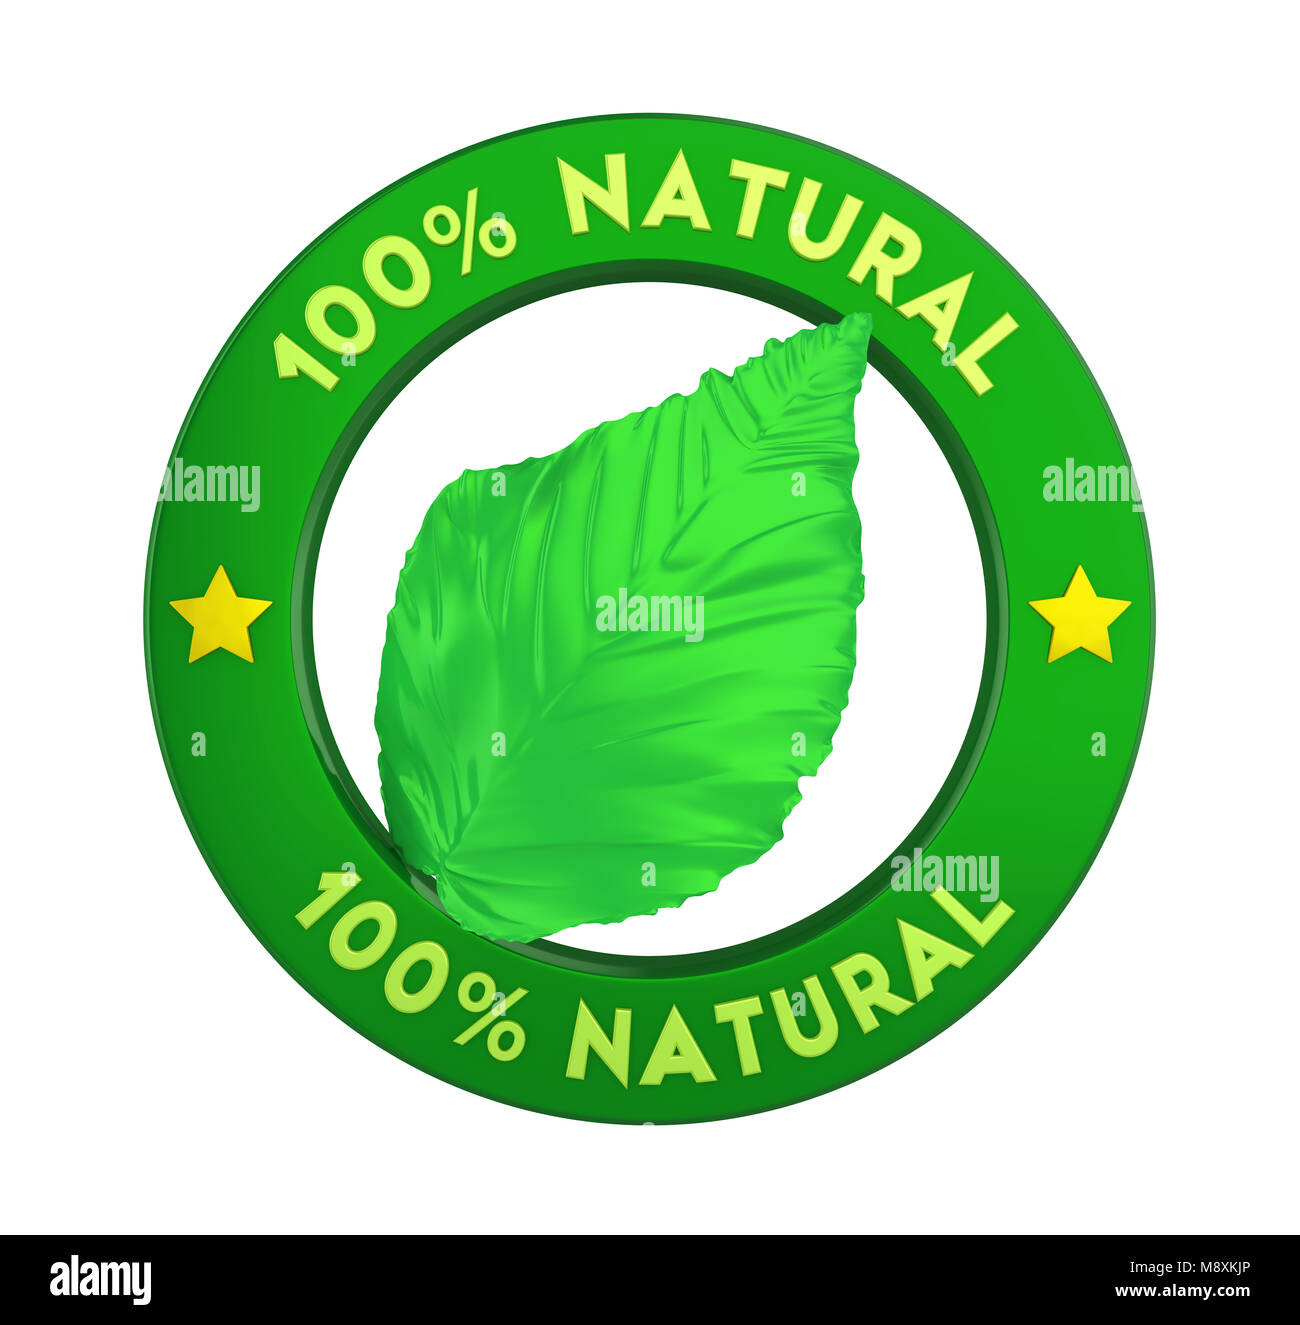 100% Natural Badge Label Isolated Stock Photo